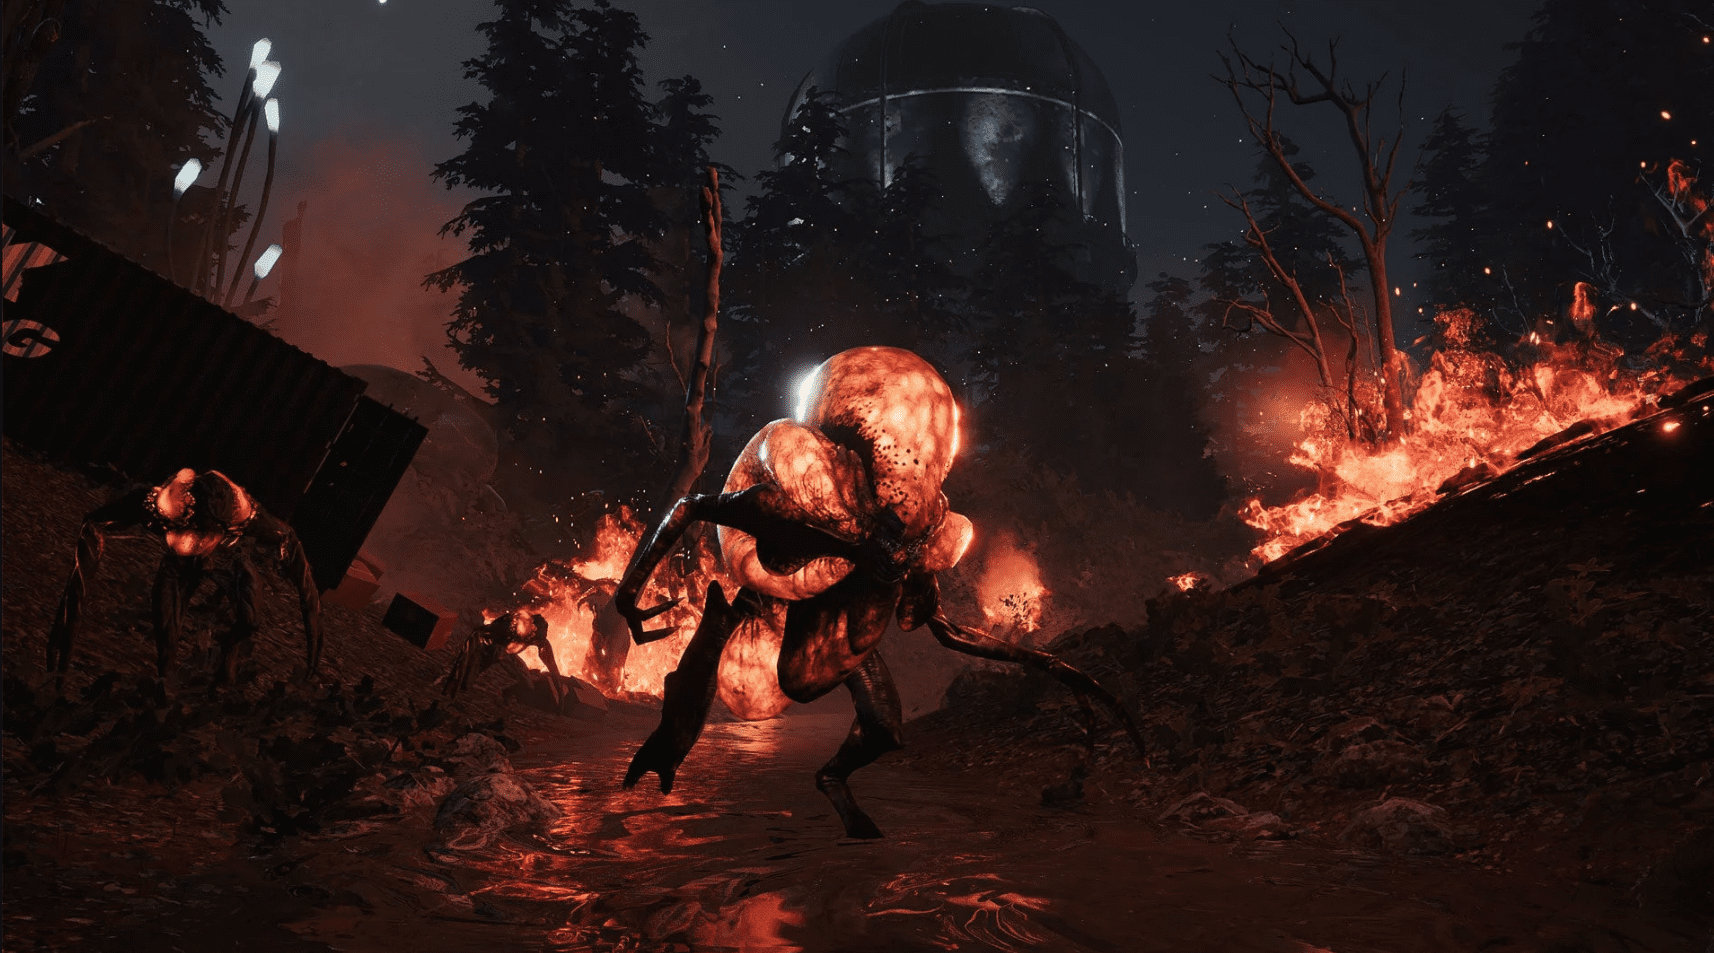 The “Inferno Update” is now live for Earthfall